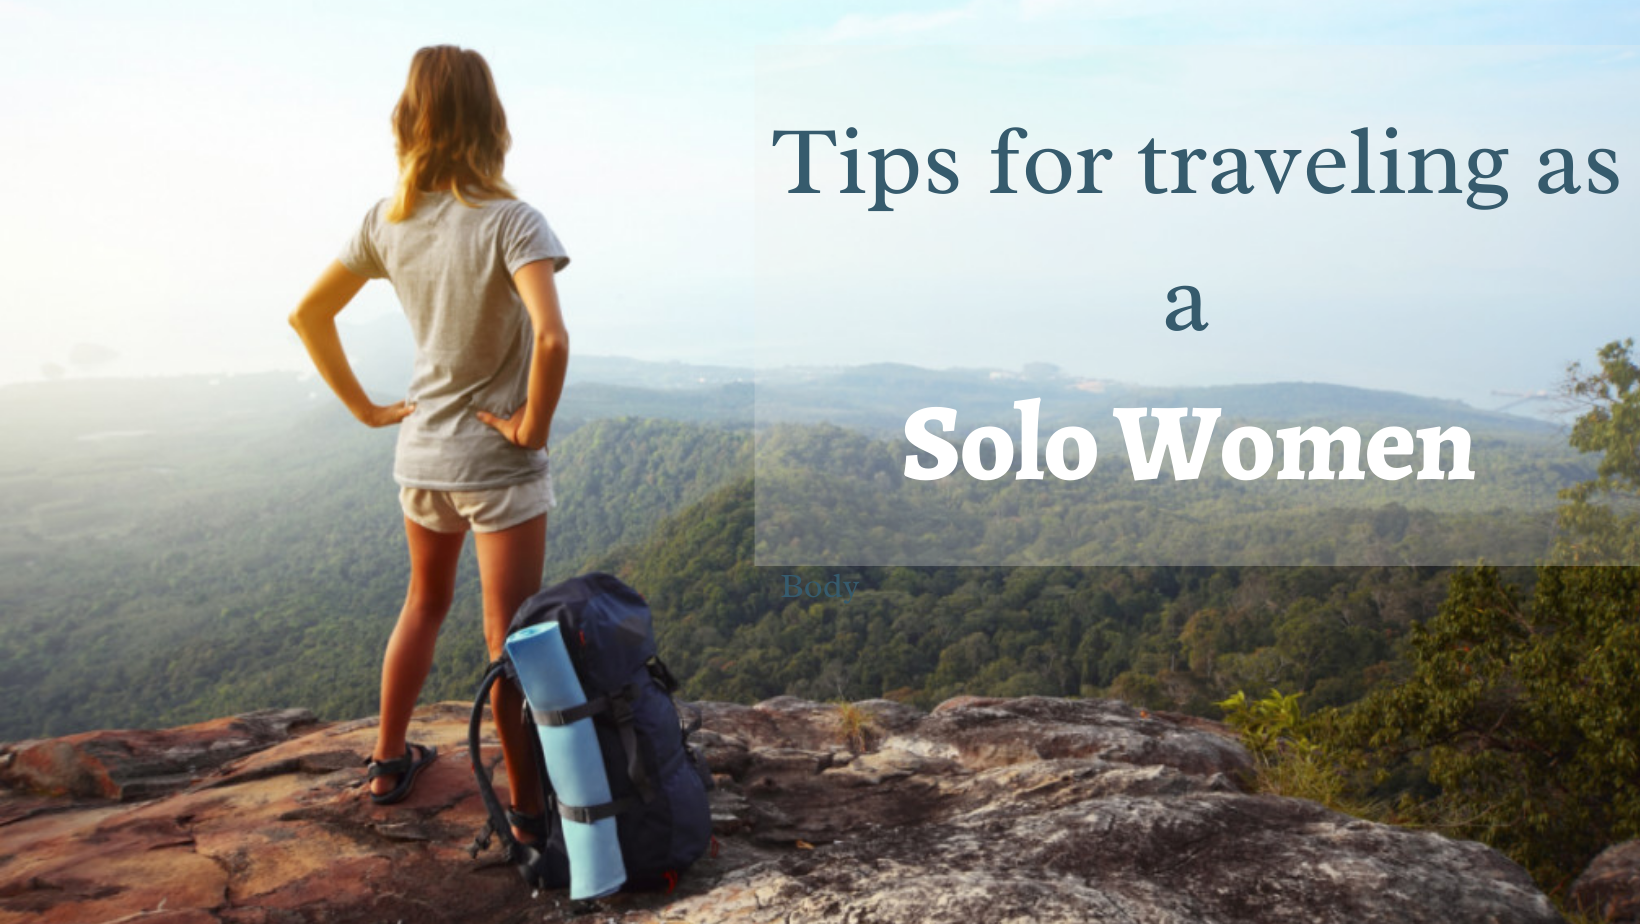 Solo Female Travel: What to Keep in Mind